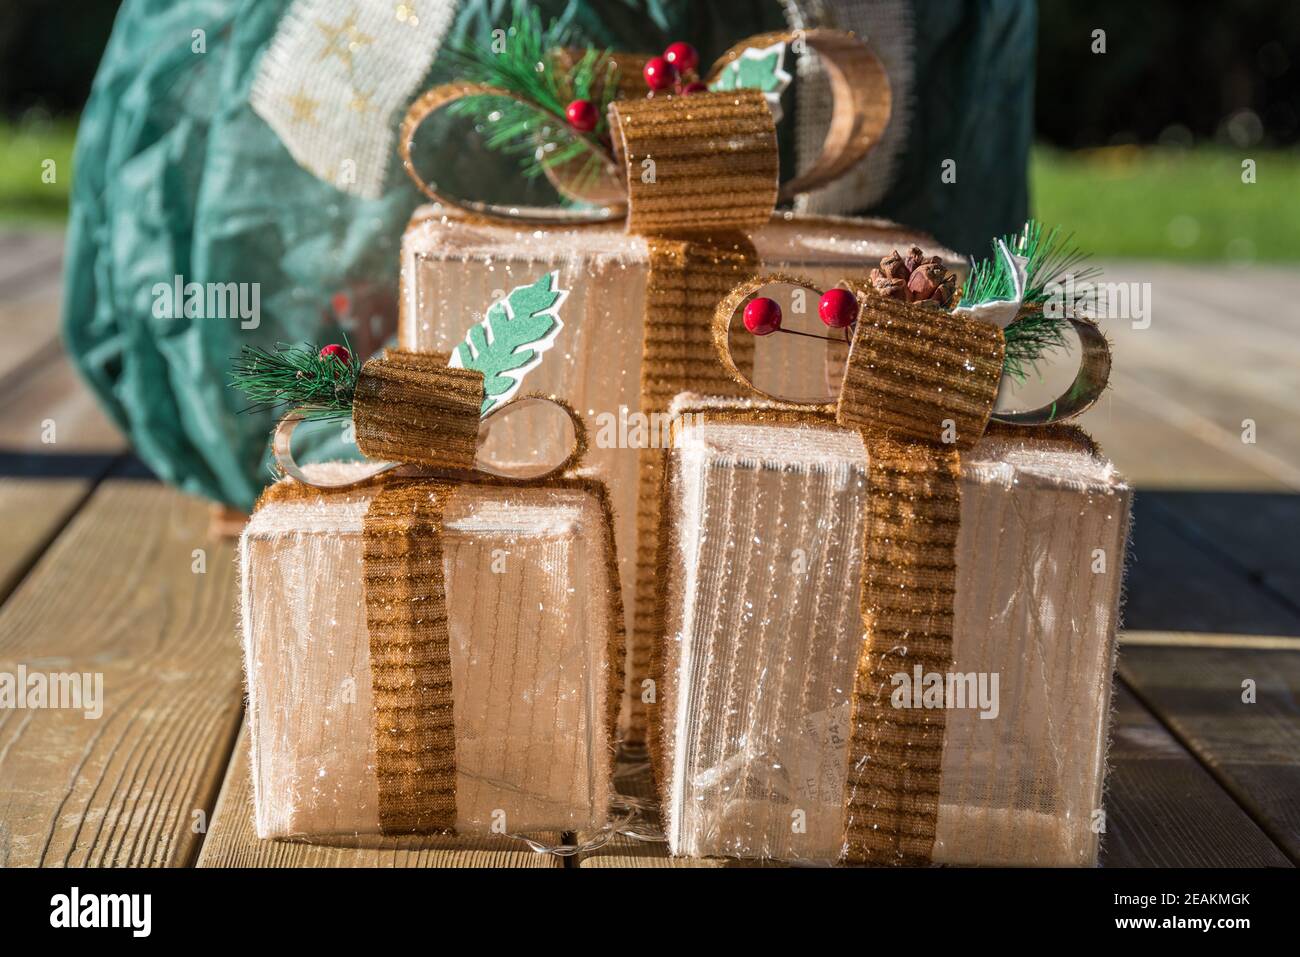 Christmas gifts as outdoor decoration Stock Photo